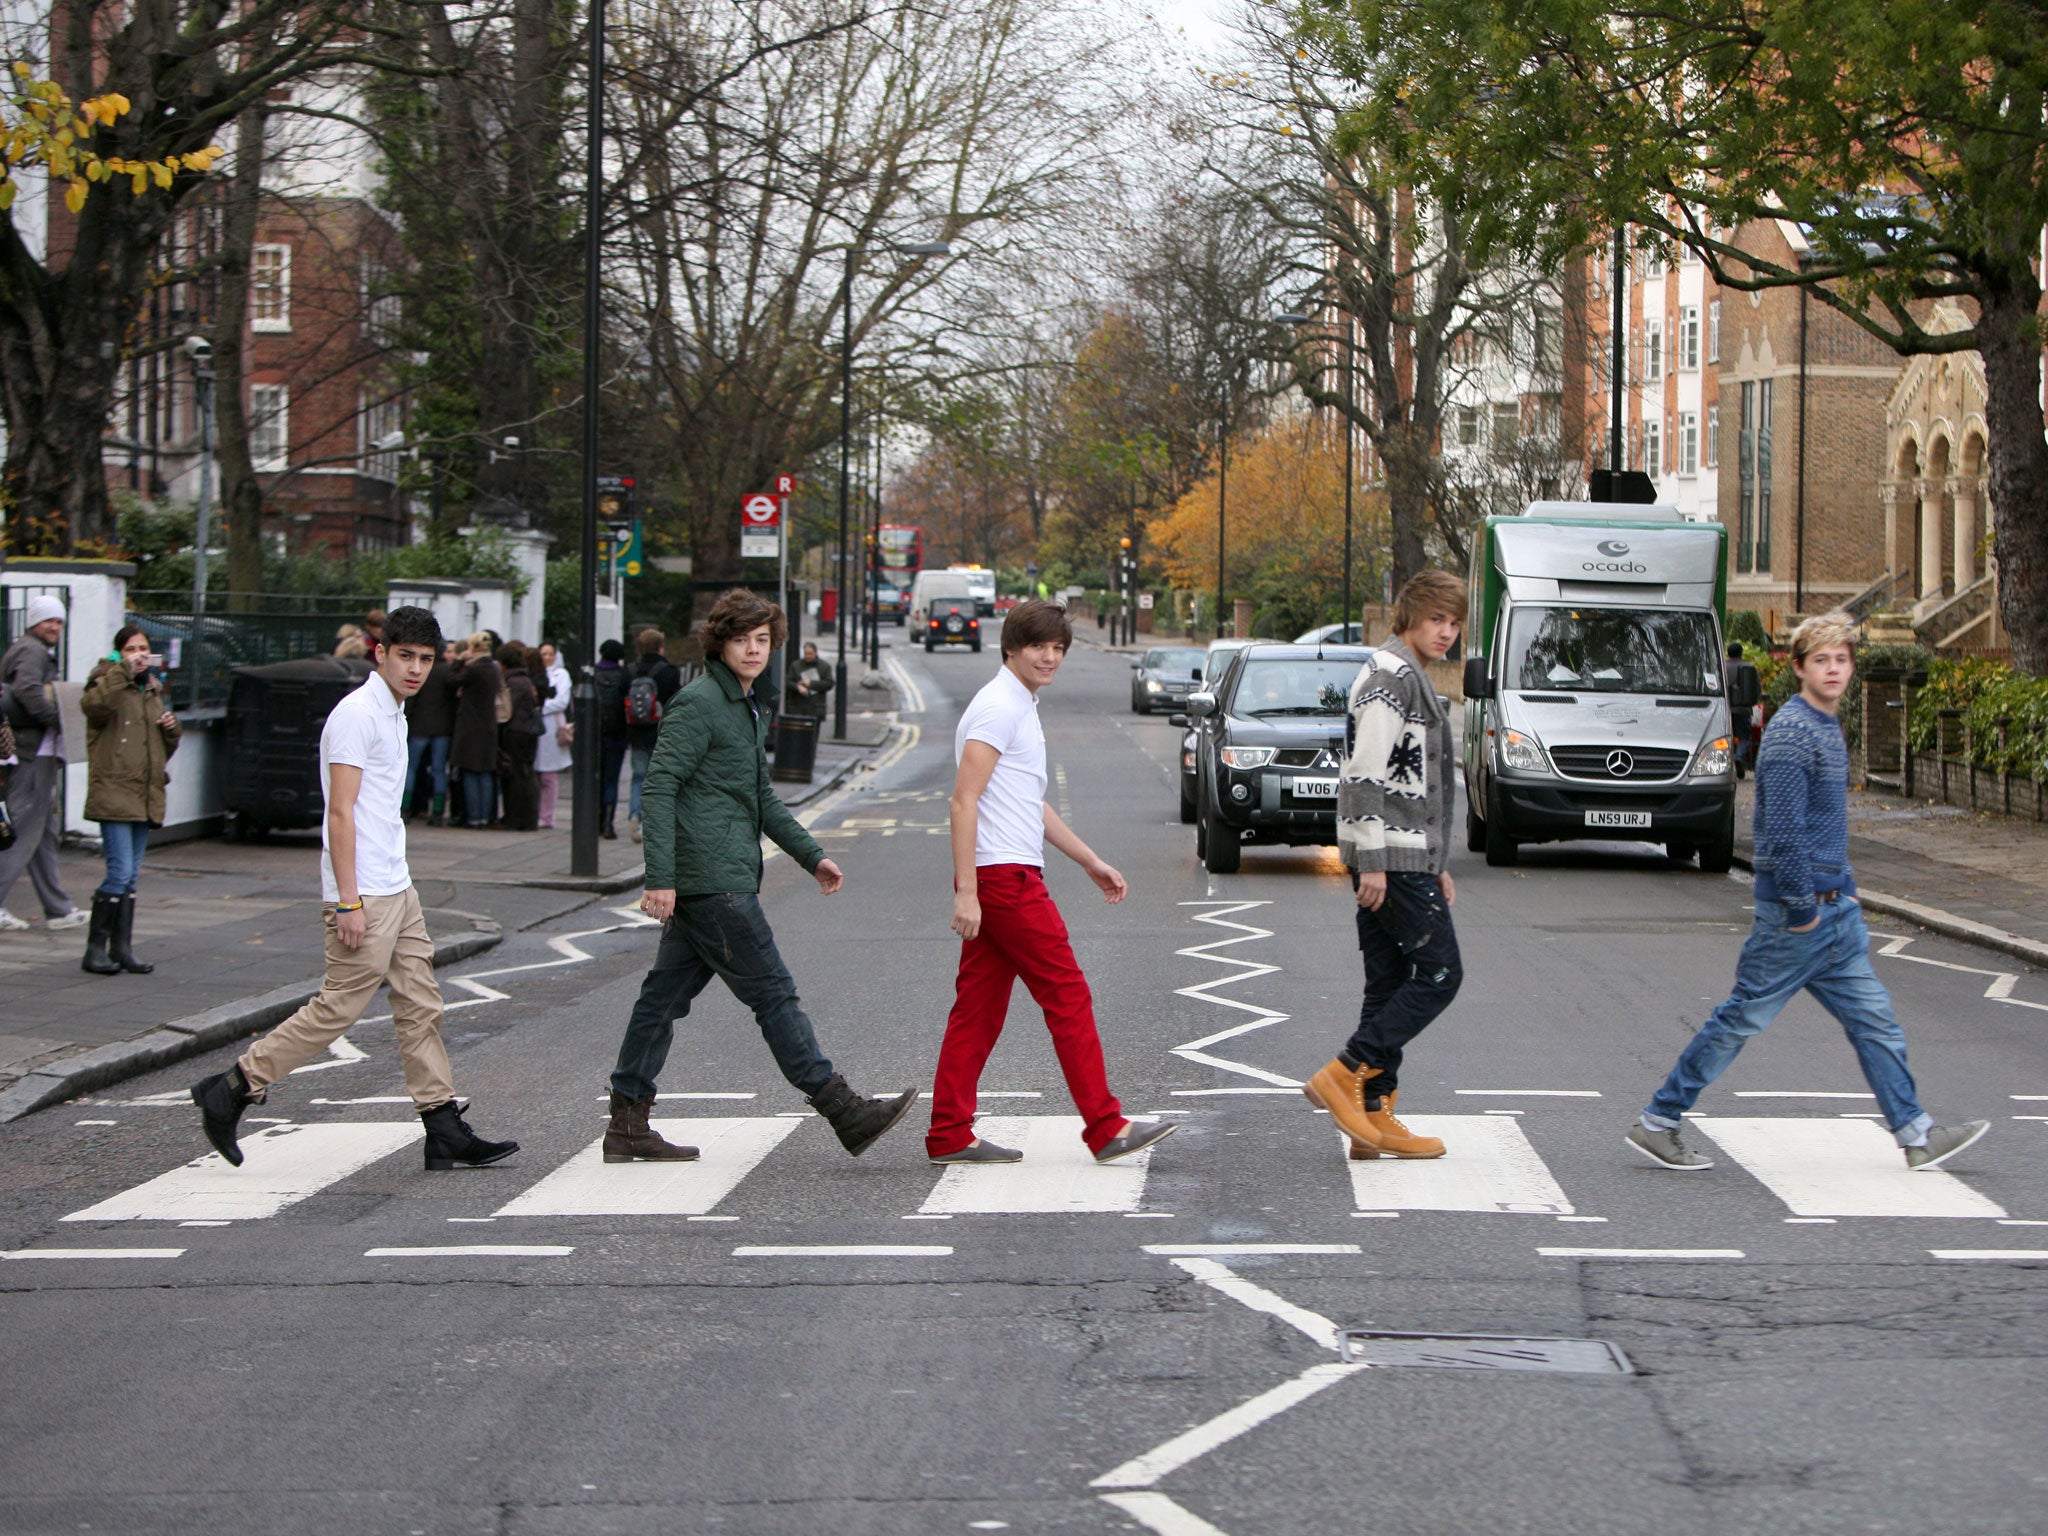 One Direction recreate The Beatles' Abbey Road album cover